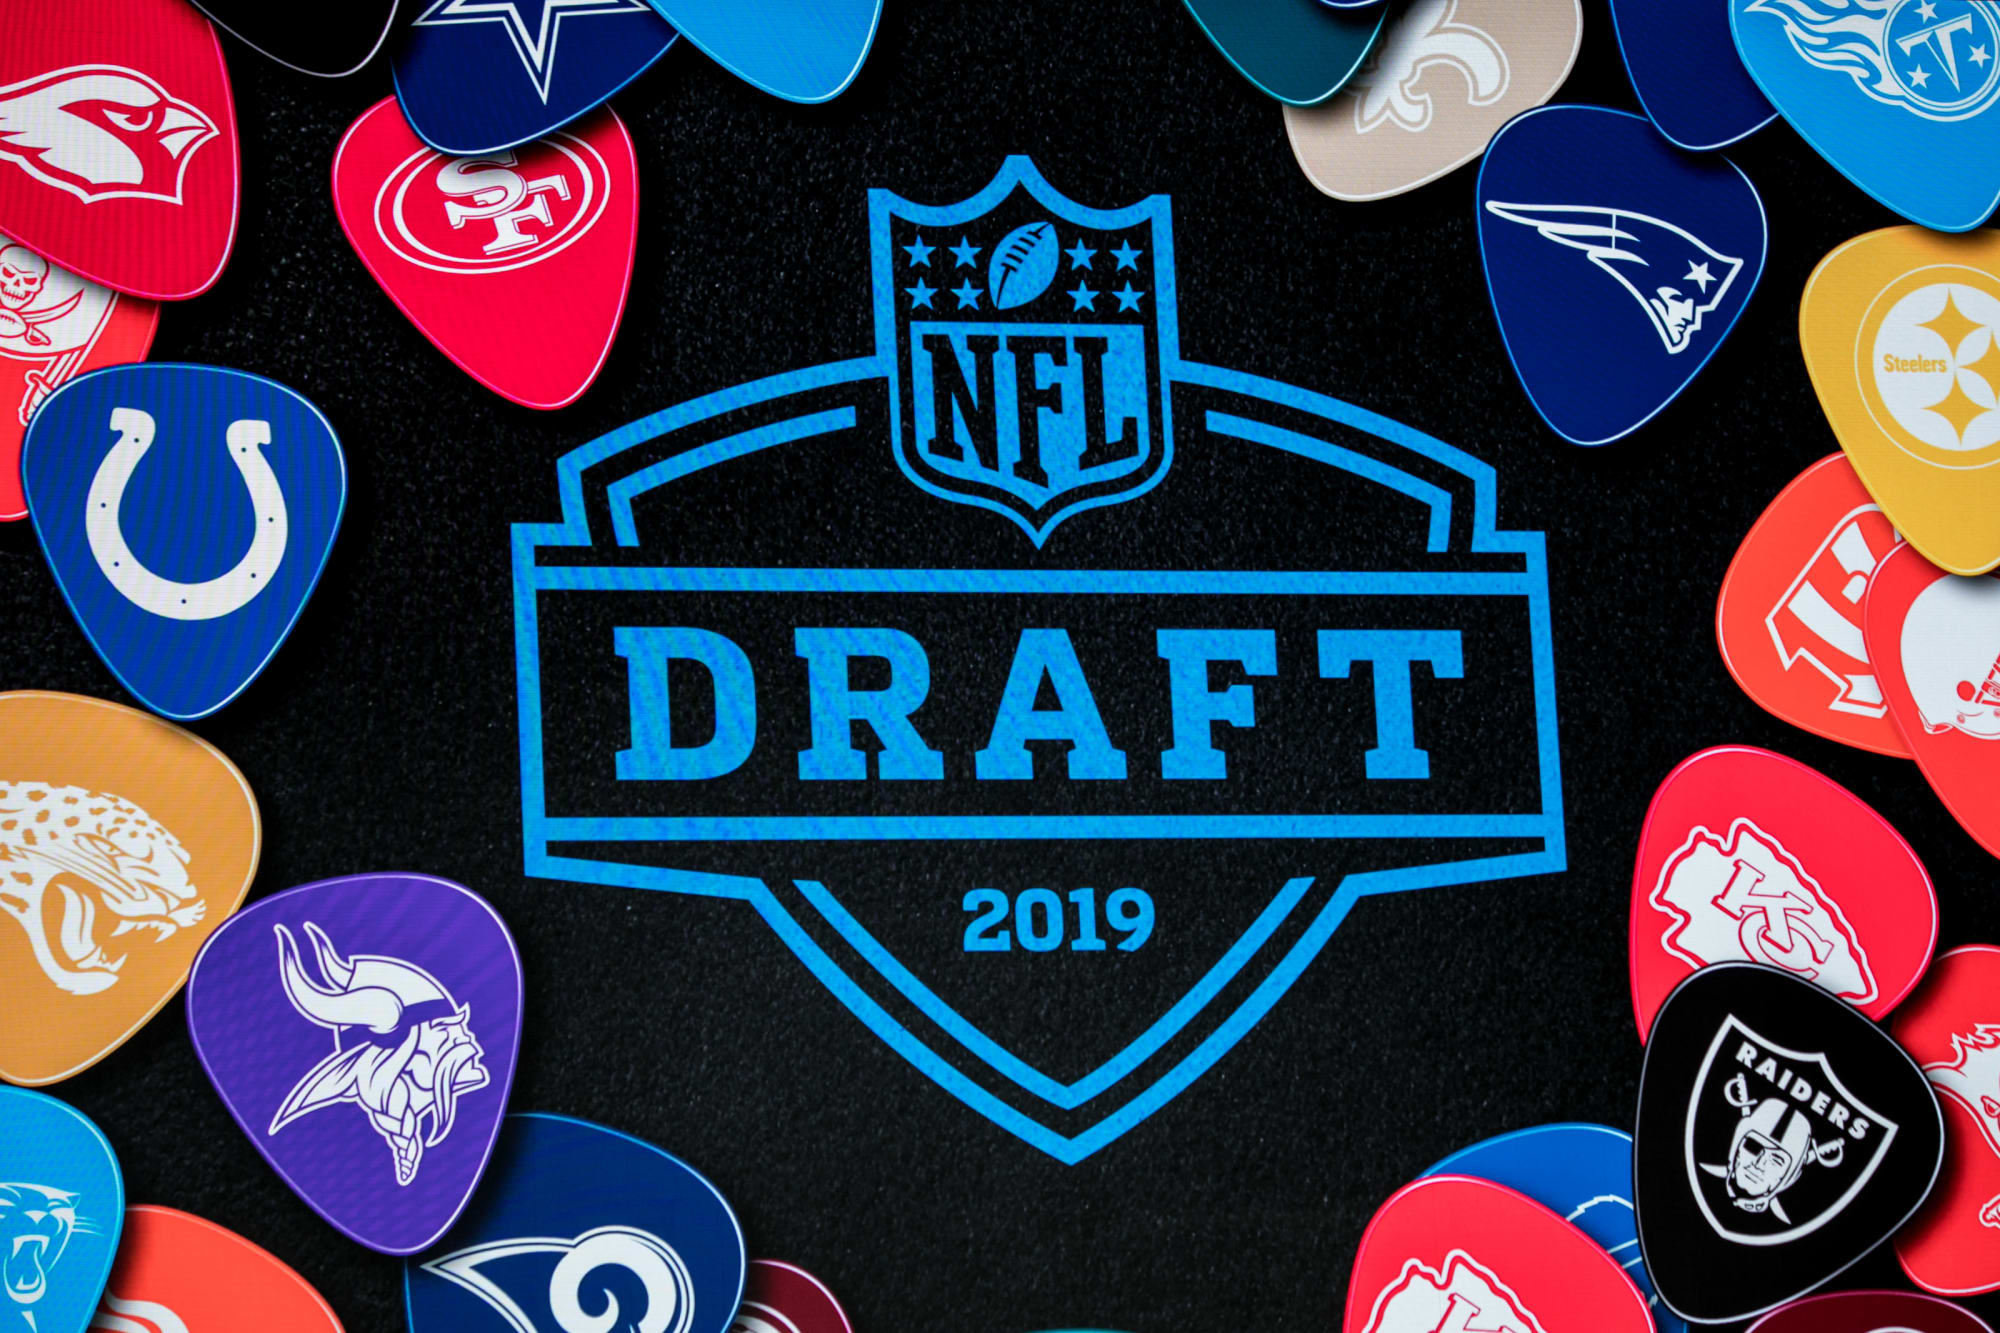 LA Rams fans face many challenges this 2020 NFL Draft